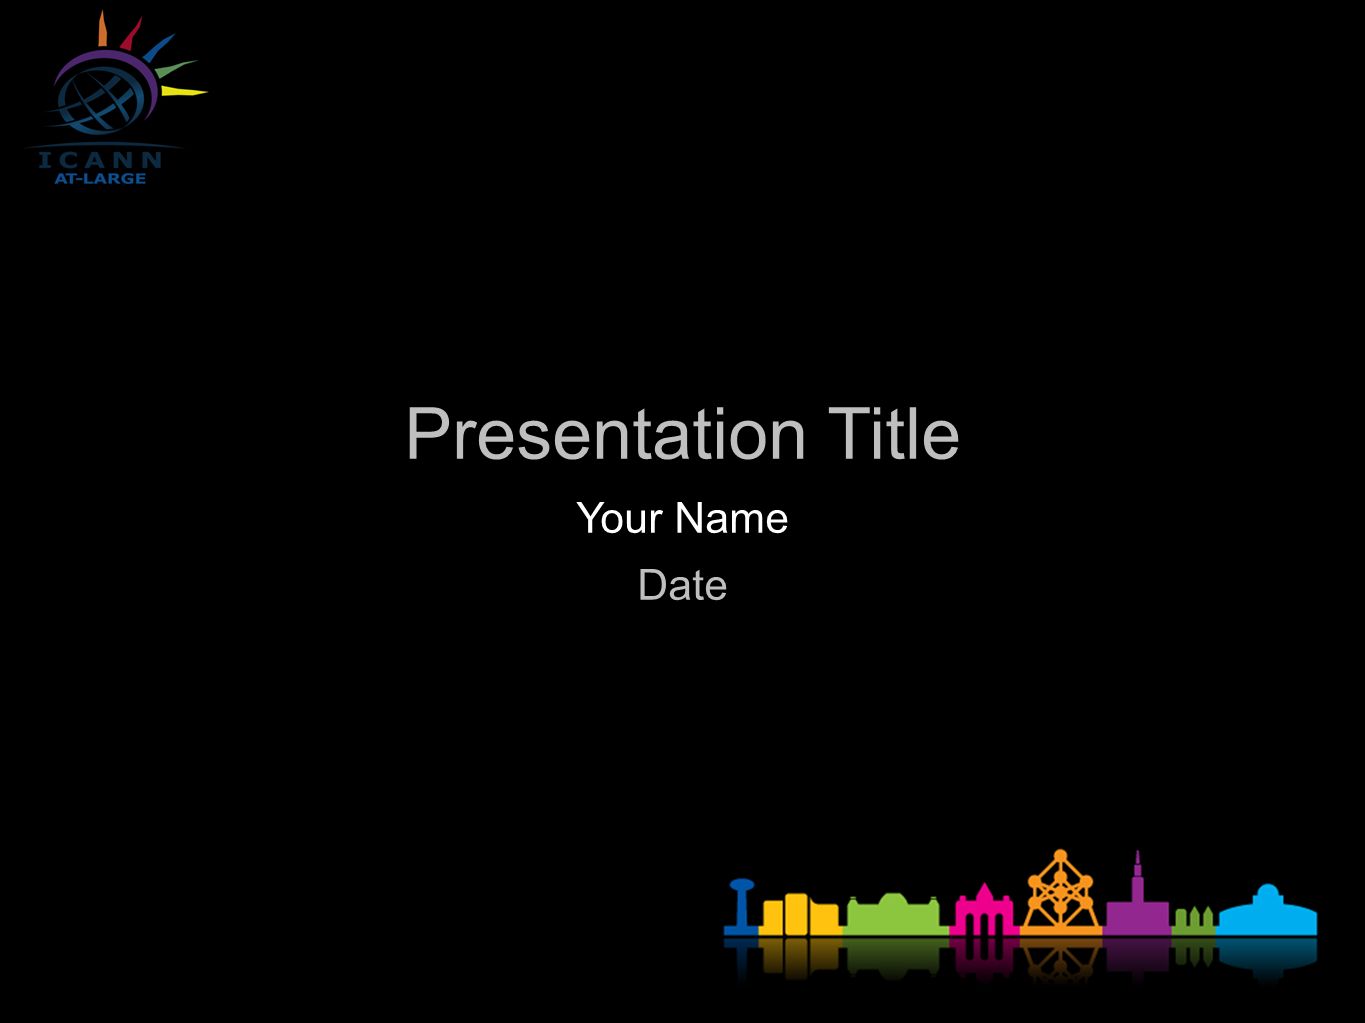 Presentation Title Your Name Date